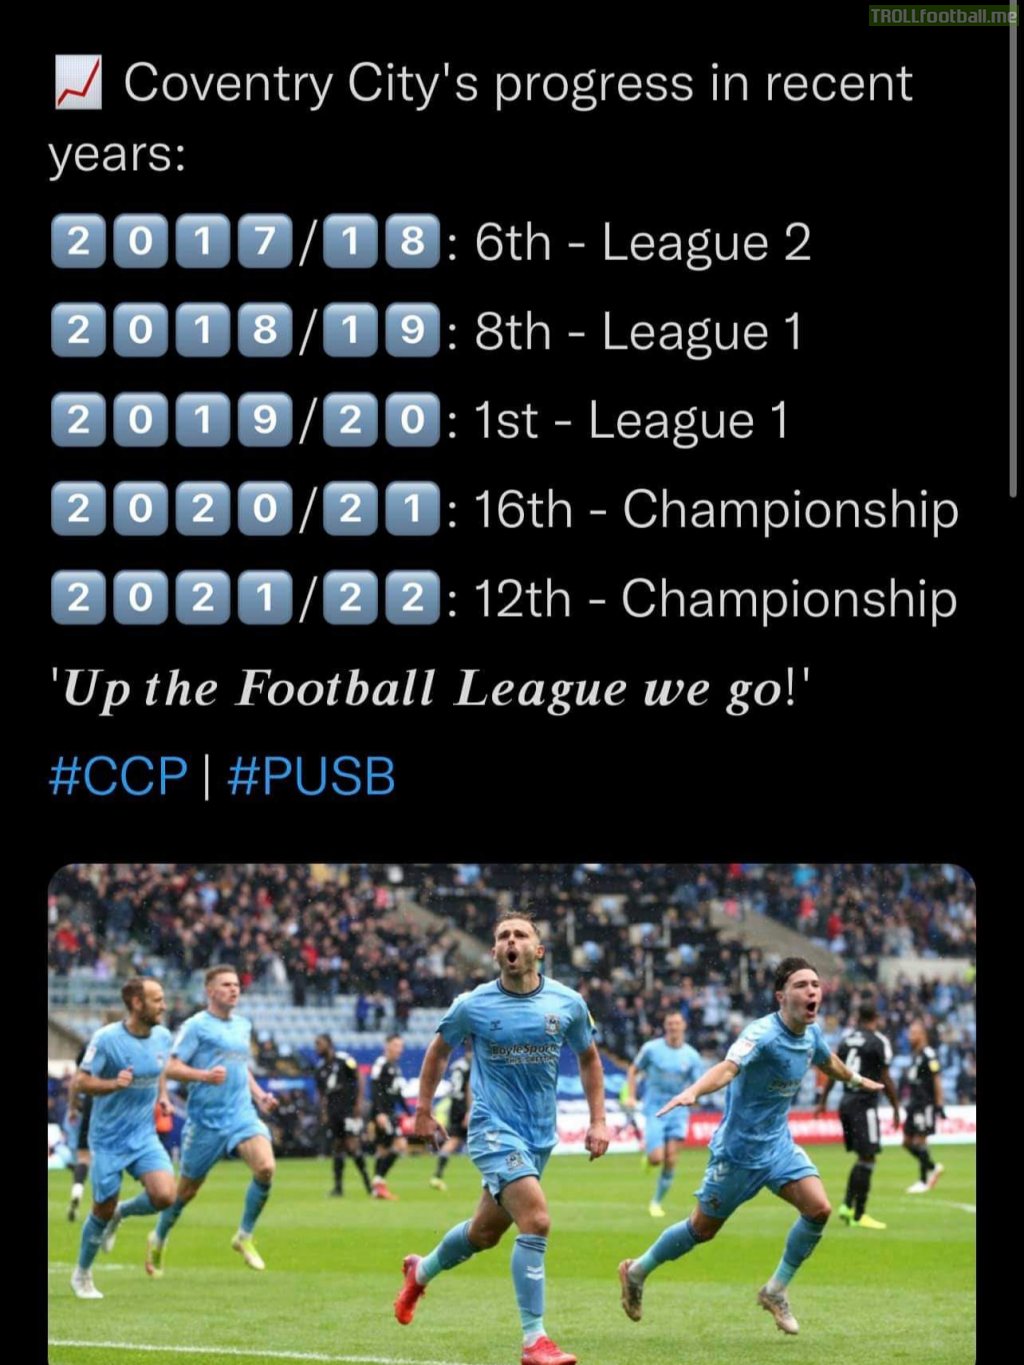 Coventry City progress over the last 5 years